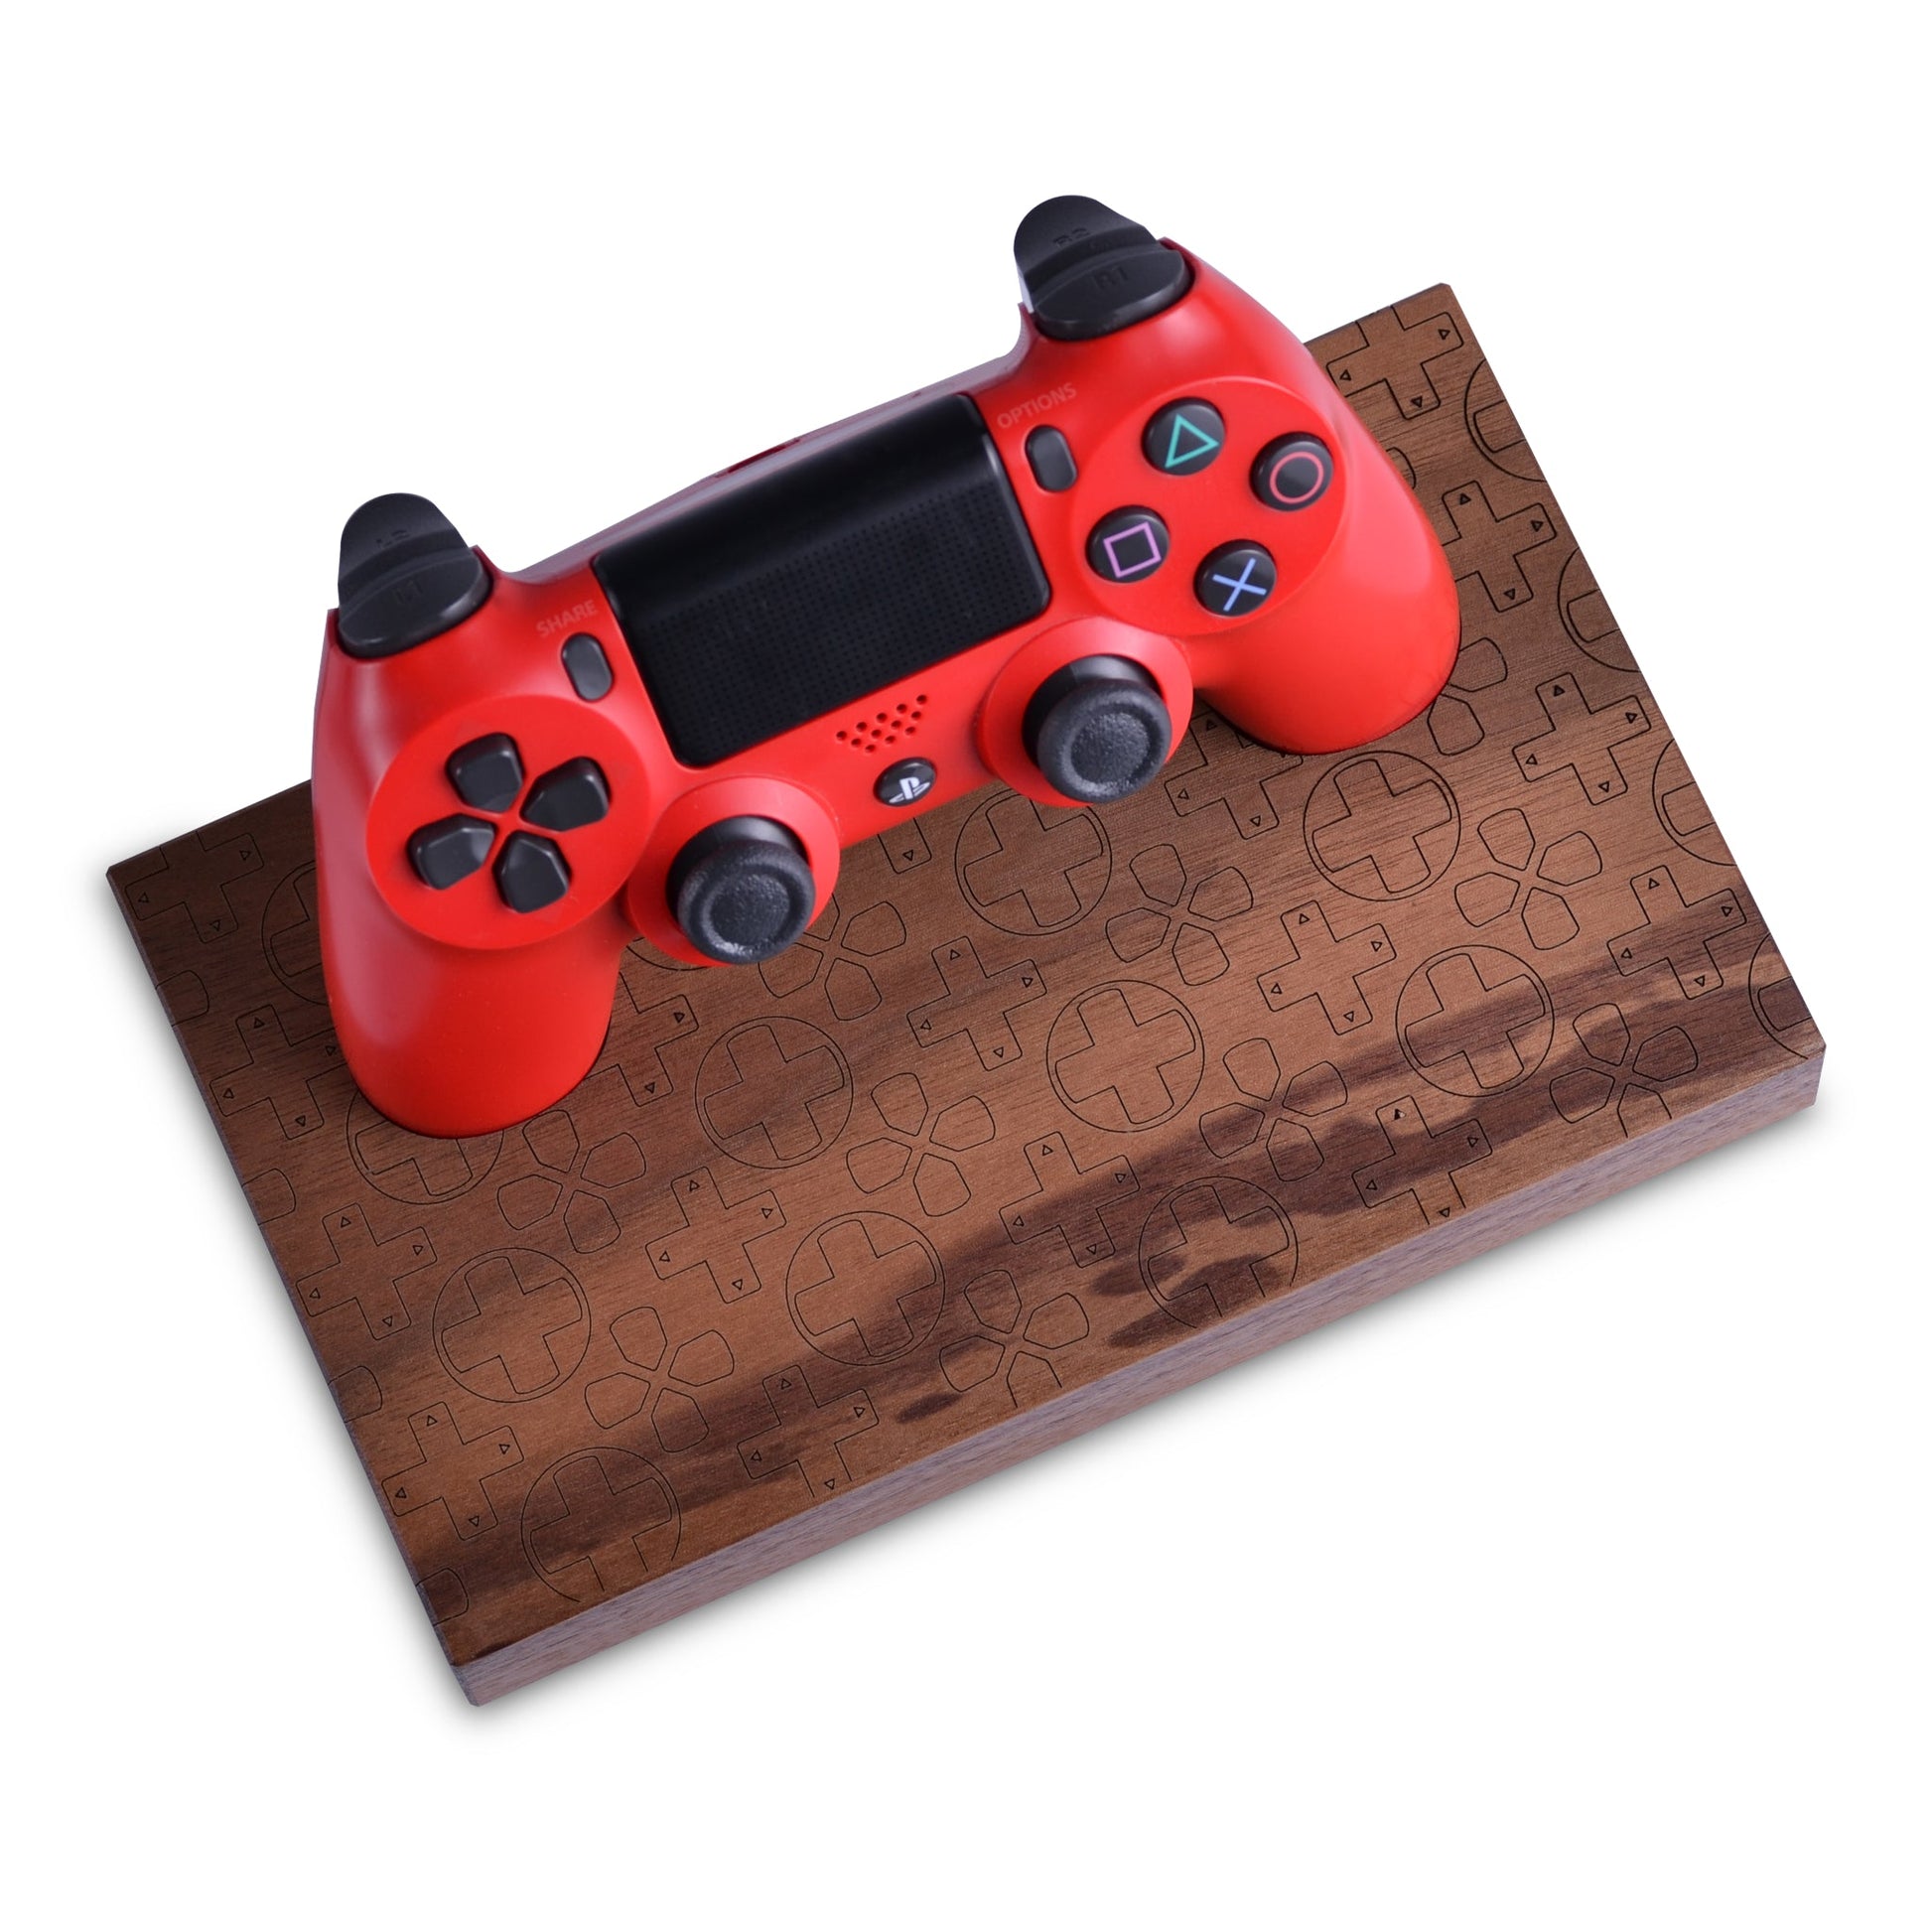 Wooden stand with d-pad design for Playstation 4 dualshock controller